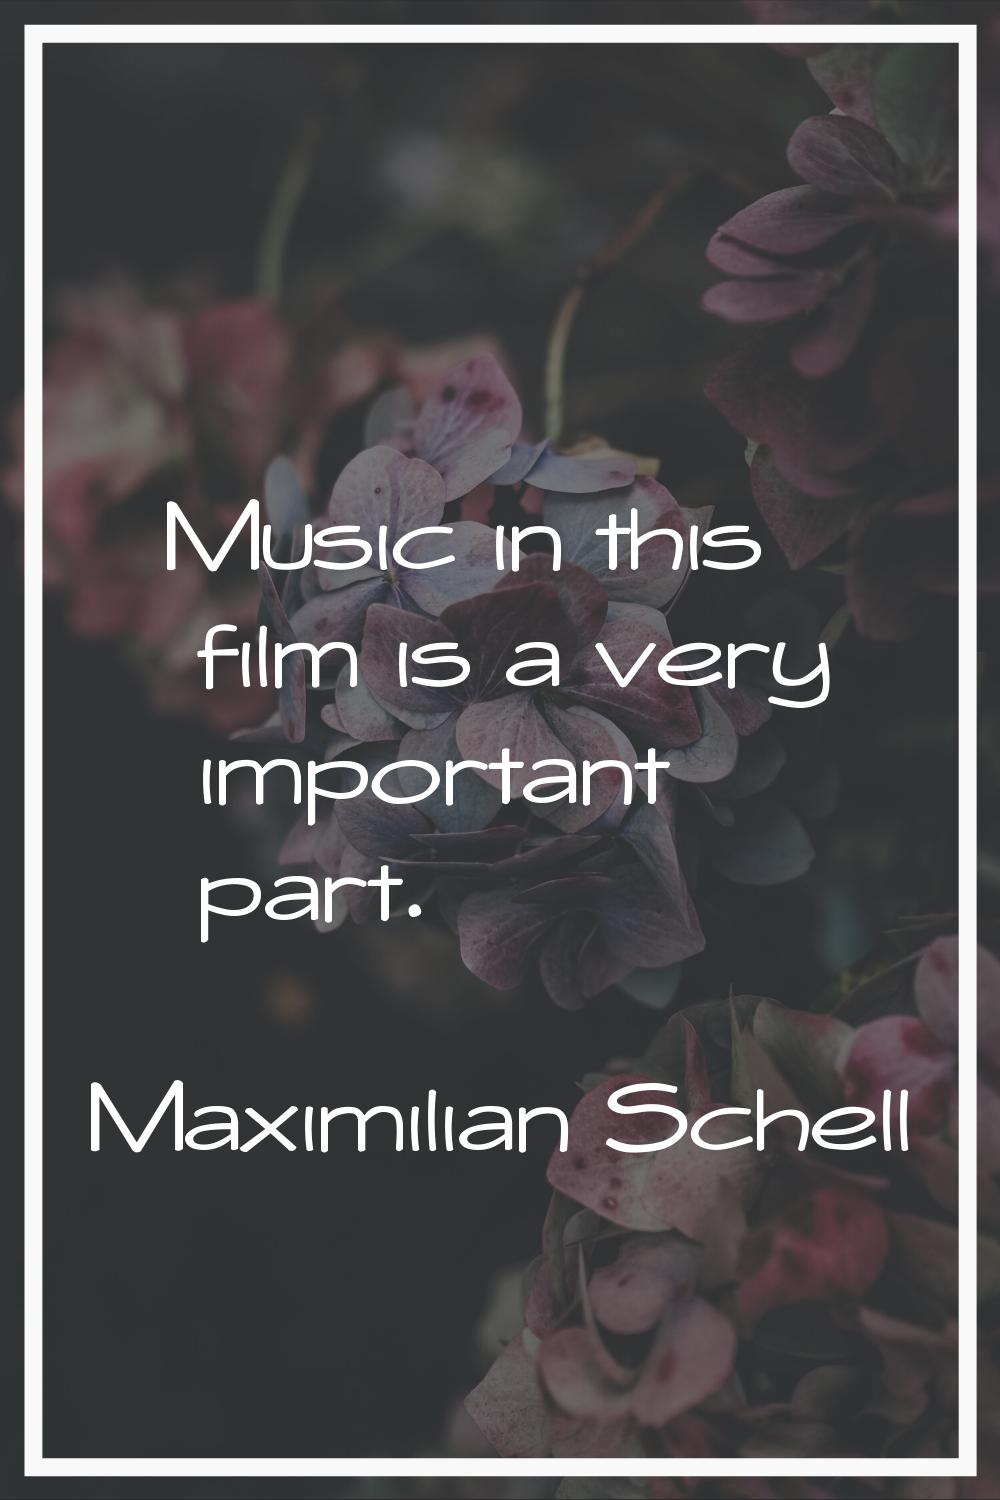 Music in this film is a very important part.